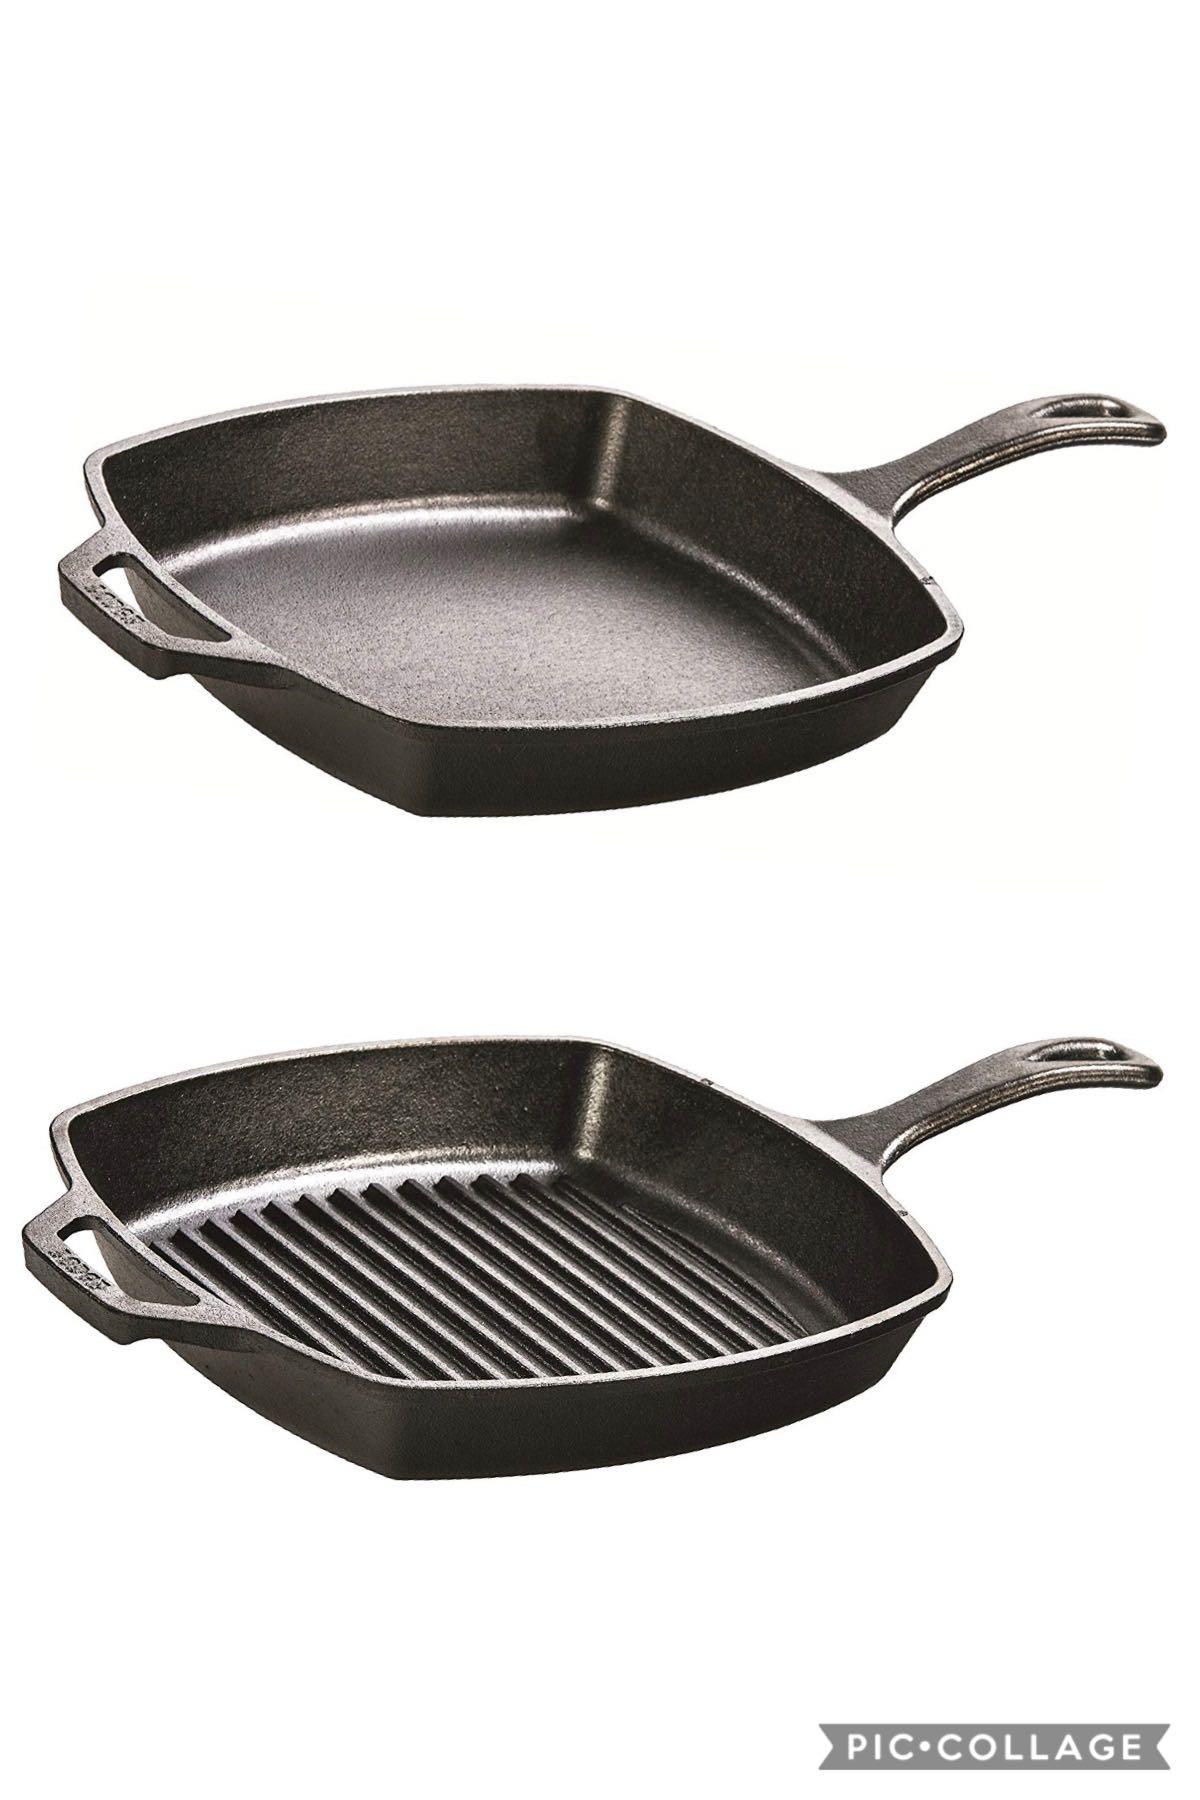 https://media.karousell.com/media/photos/products/2019/11/21/lodge_cast_iron_square_skillet_and_grill_pan_set_free_delivery_1574312696_41f1c341_progressive.jpg